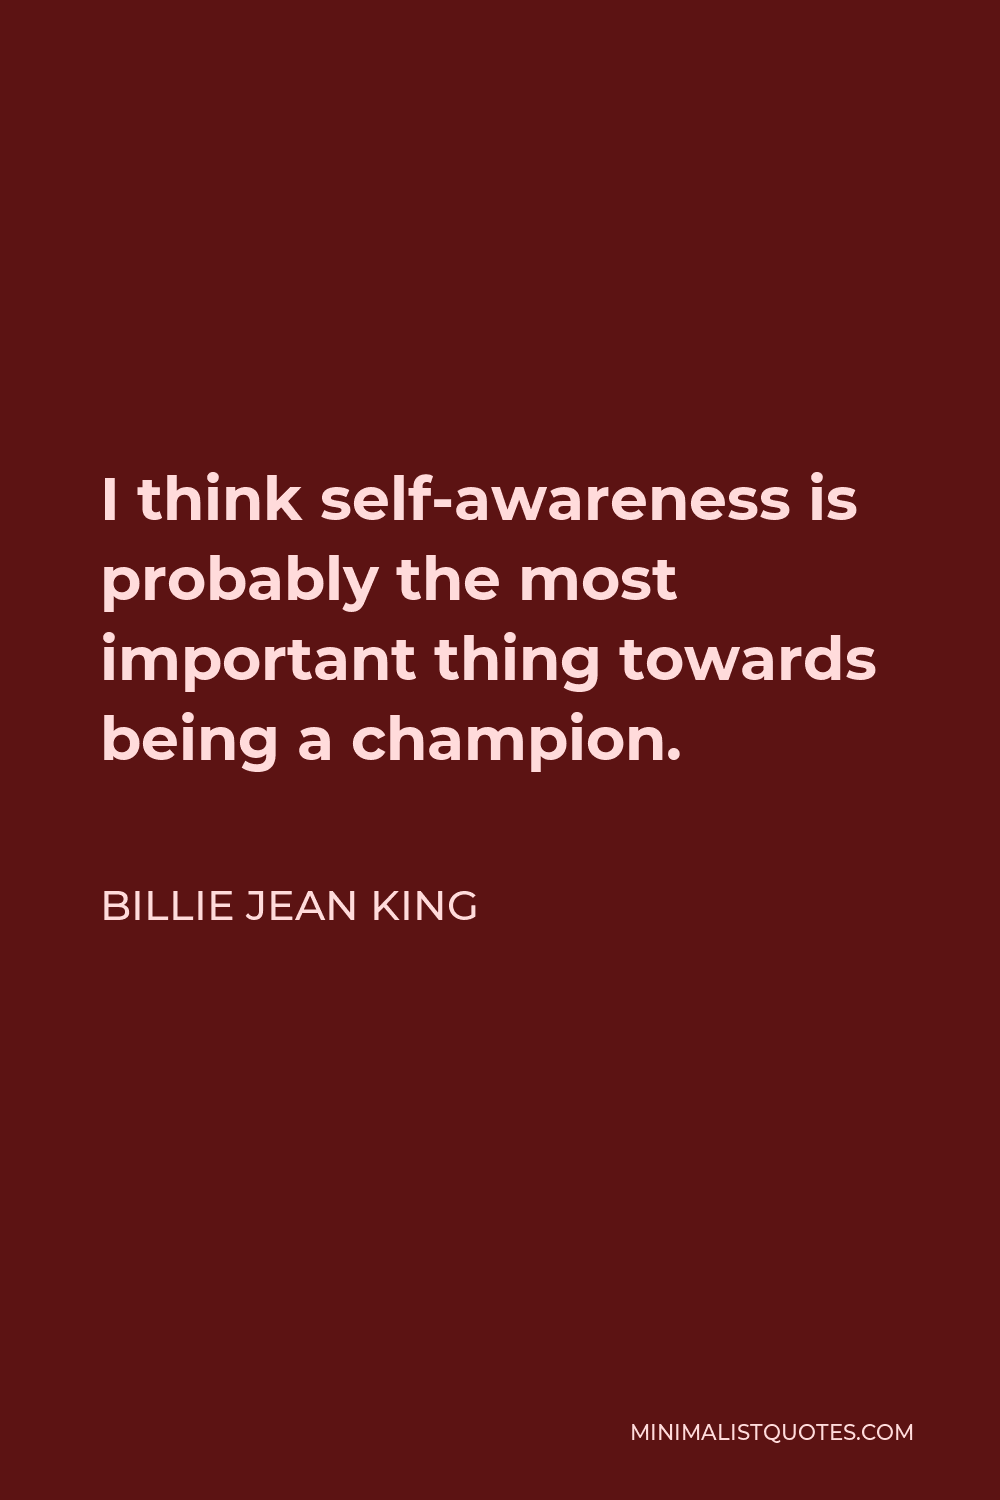 Billie Jean King Quote - I think self-awareness is probably the most important thing towards being a champion.